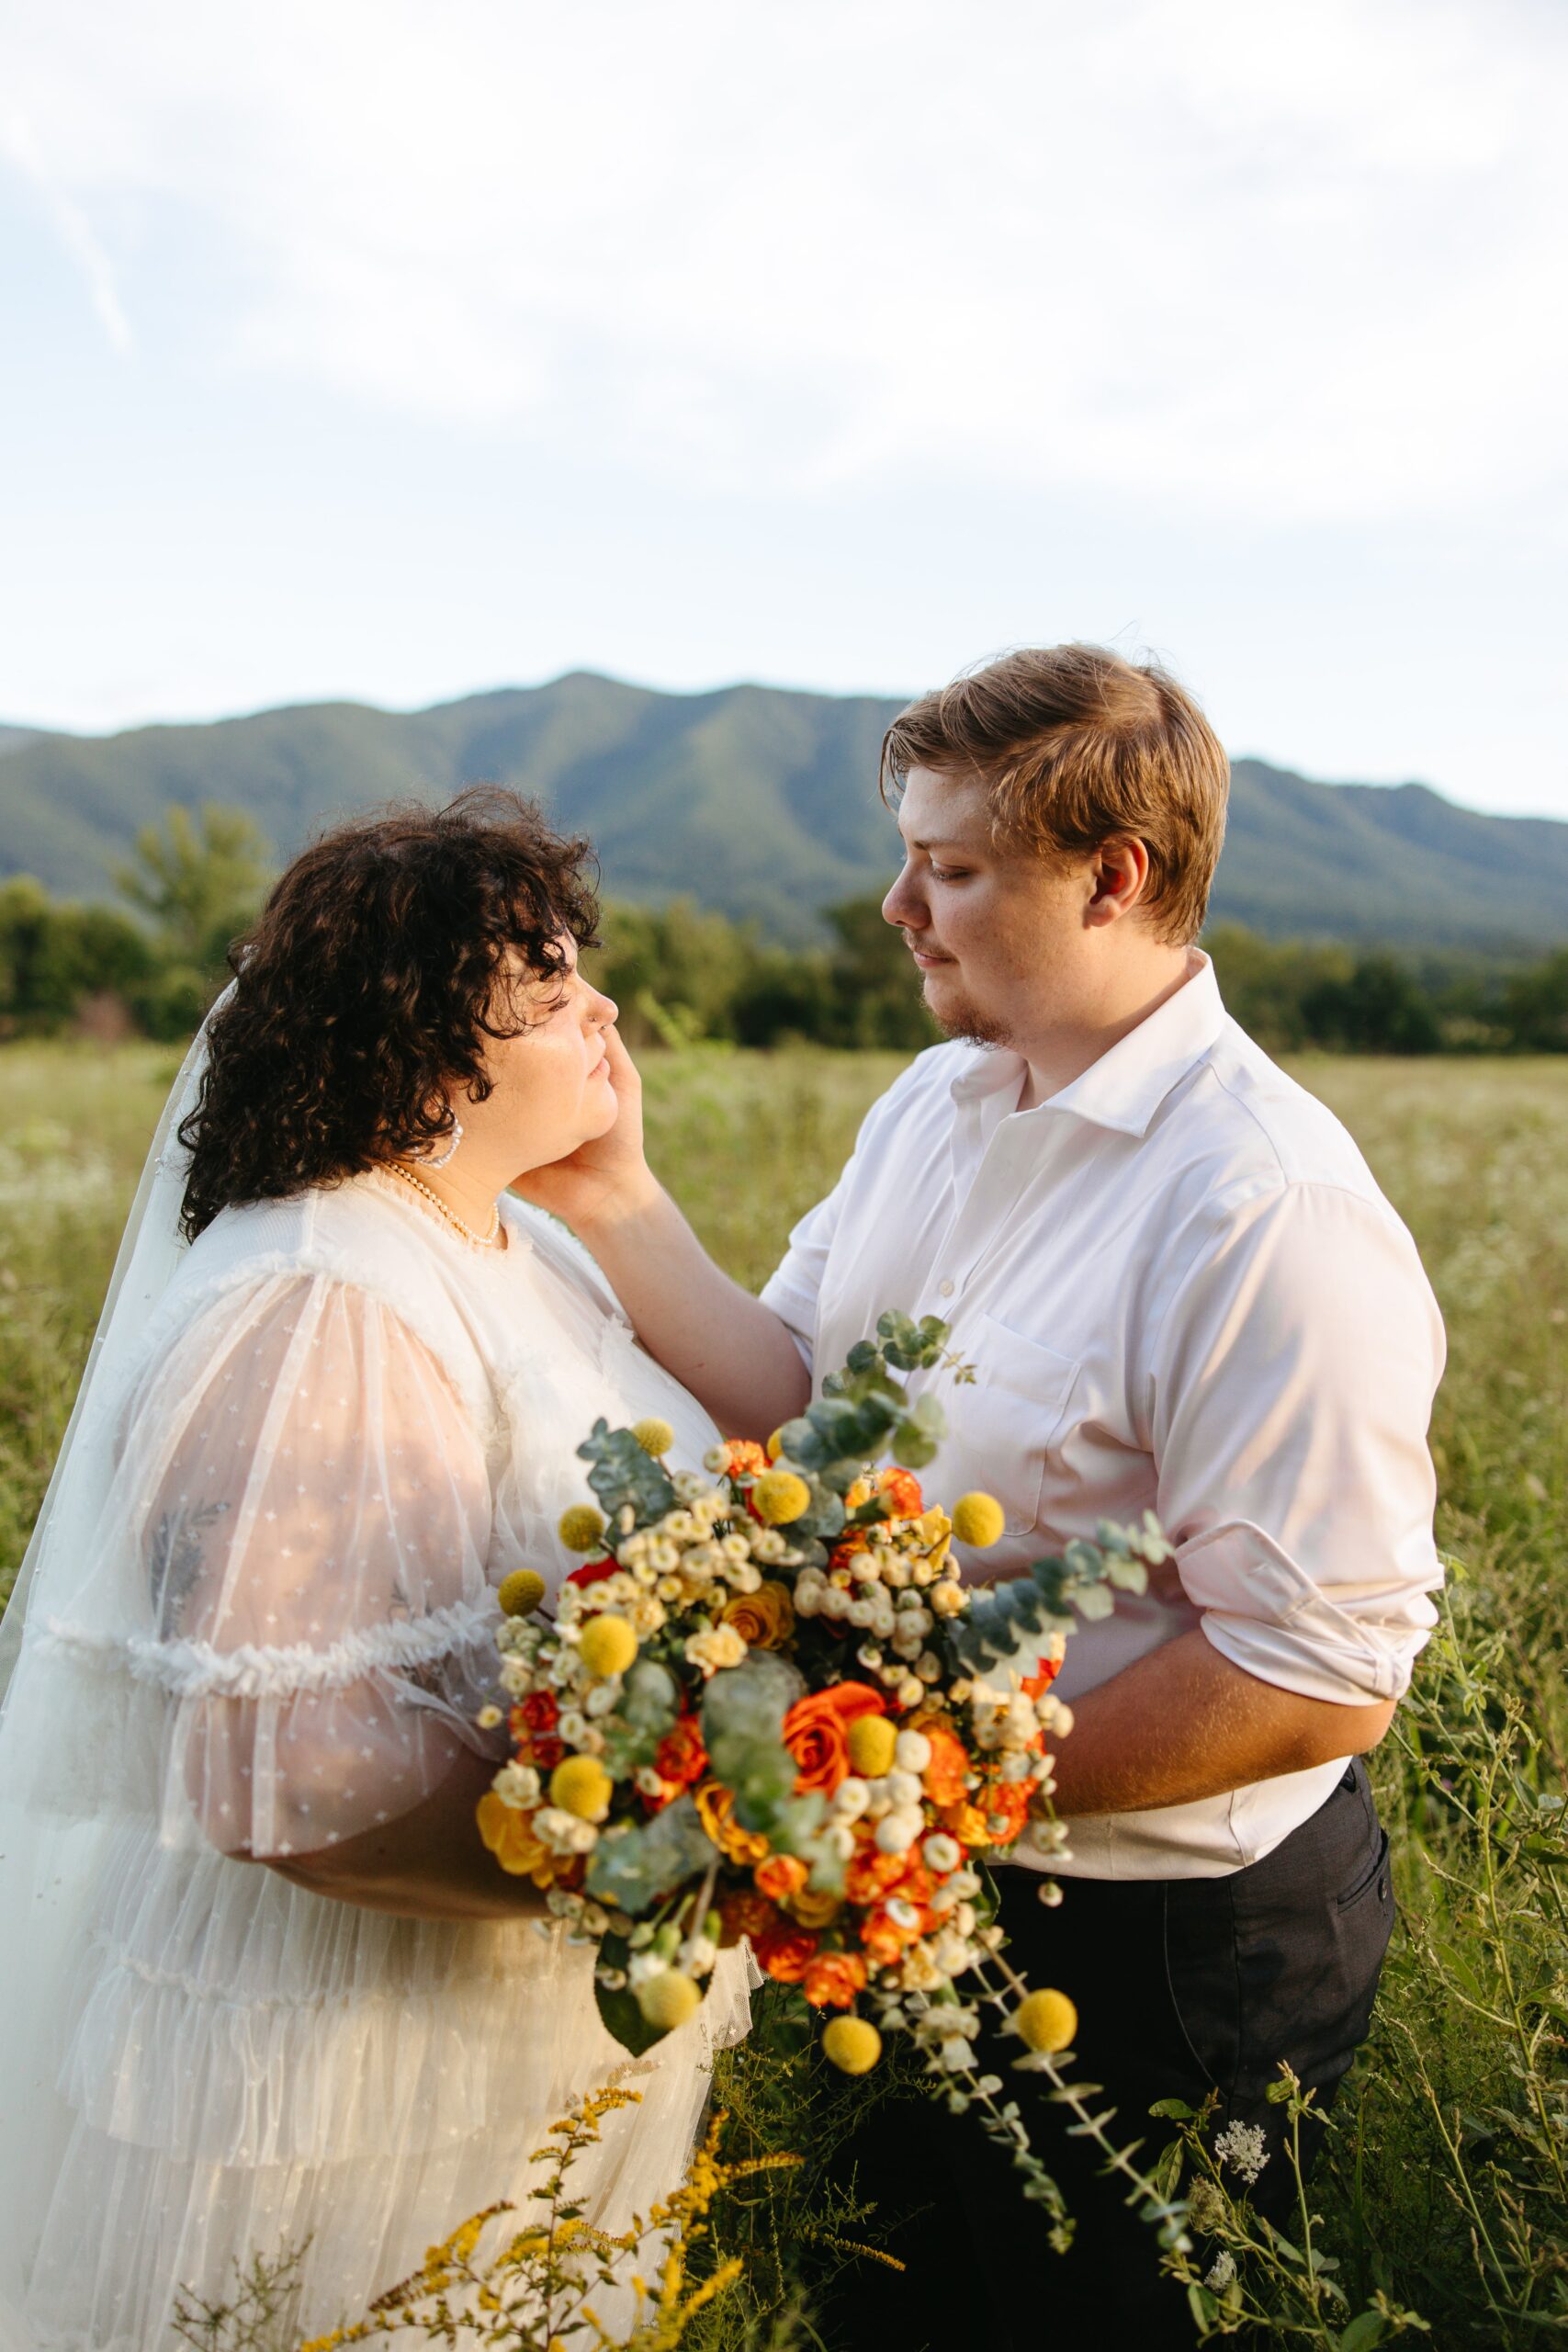 A groom touches his bride's face in a field in the Smoky Mountains.